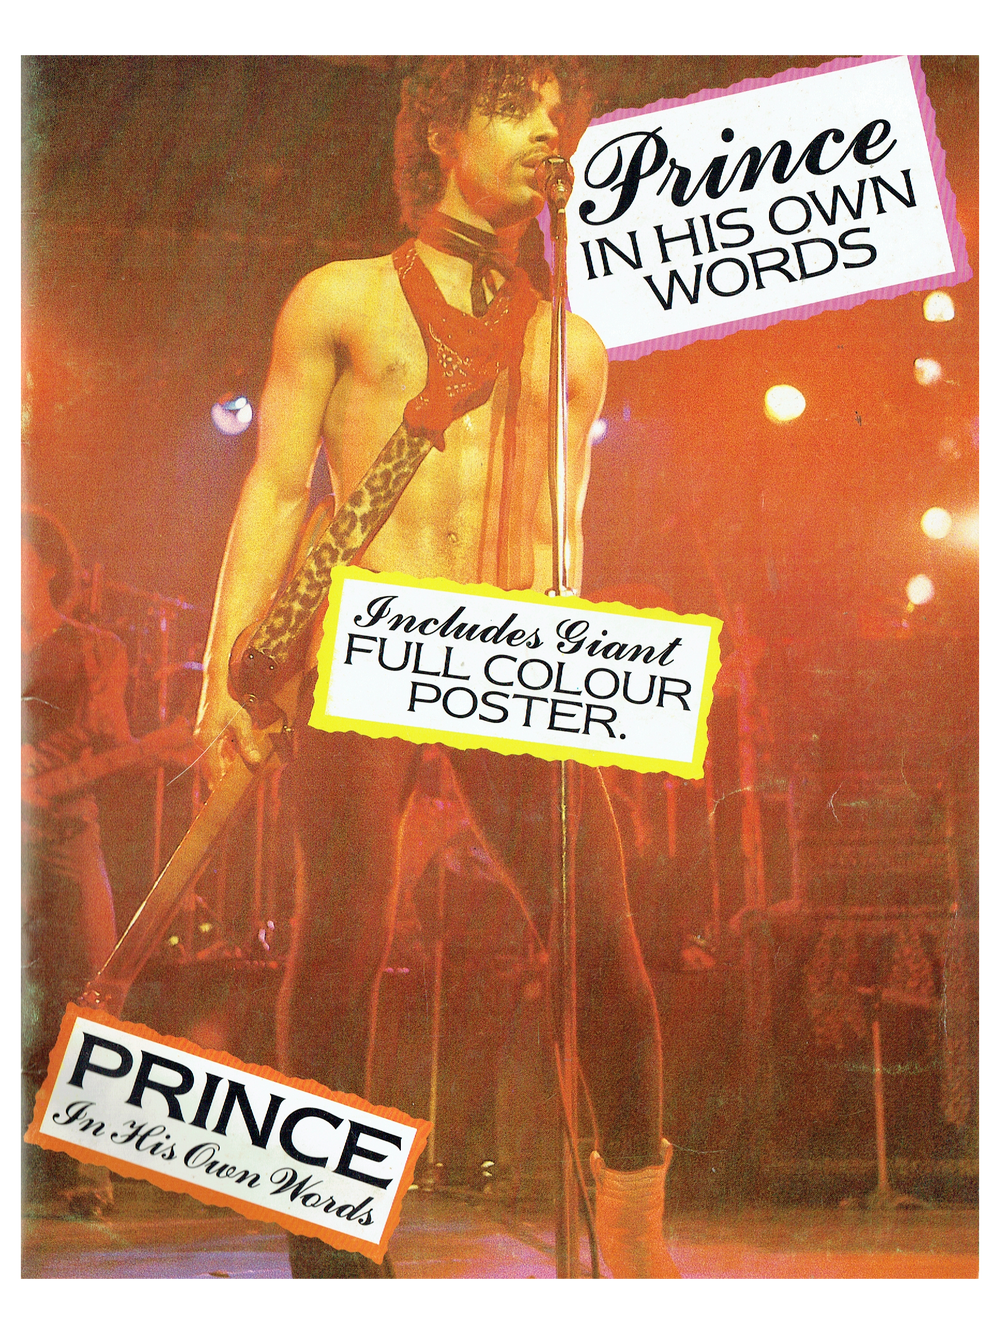 Prince In His Own Words Softback Book Published 1984 & Poster Very Rare